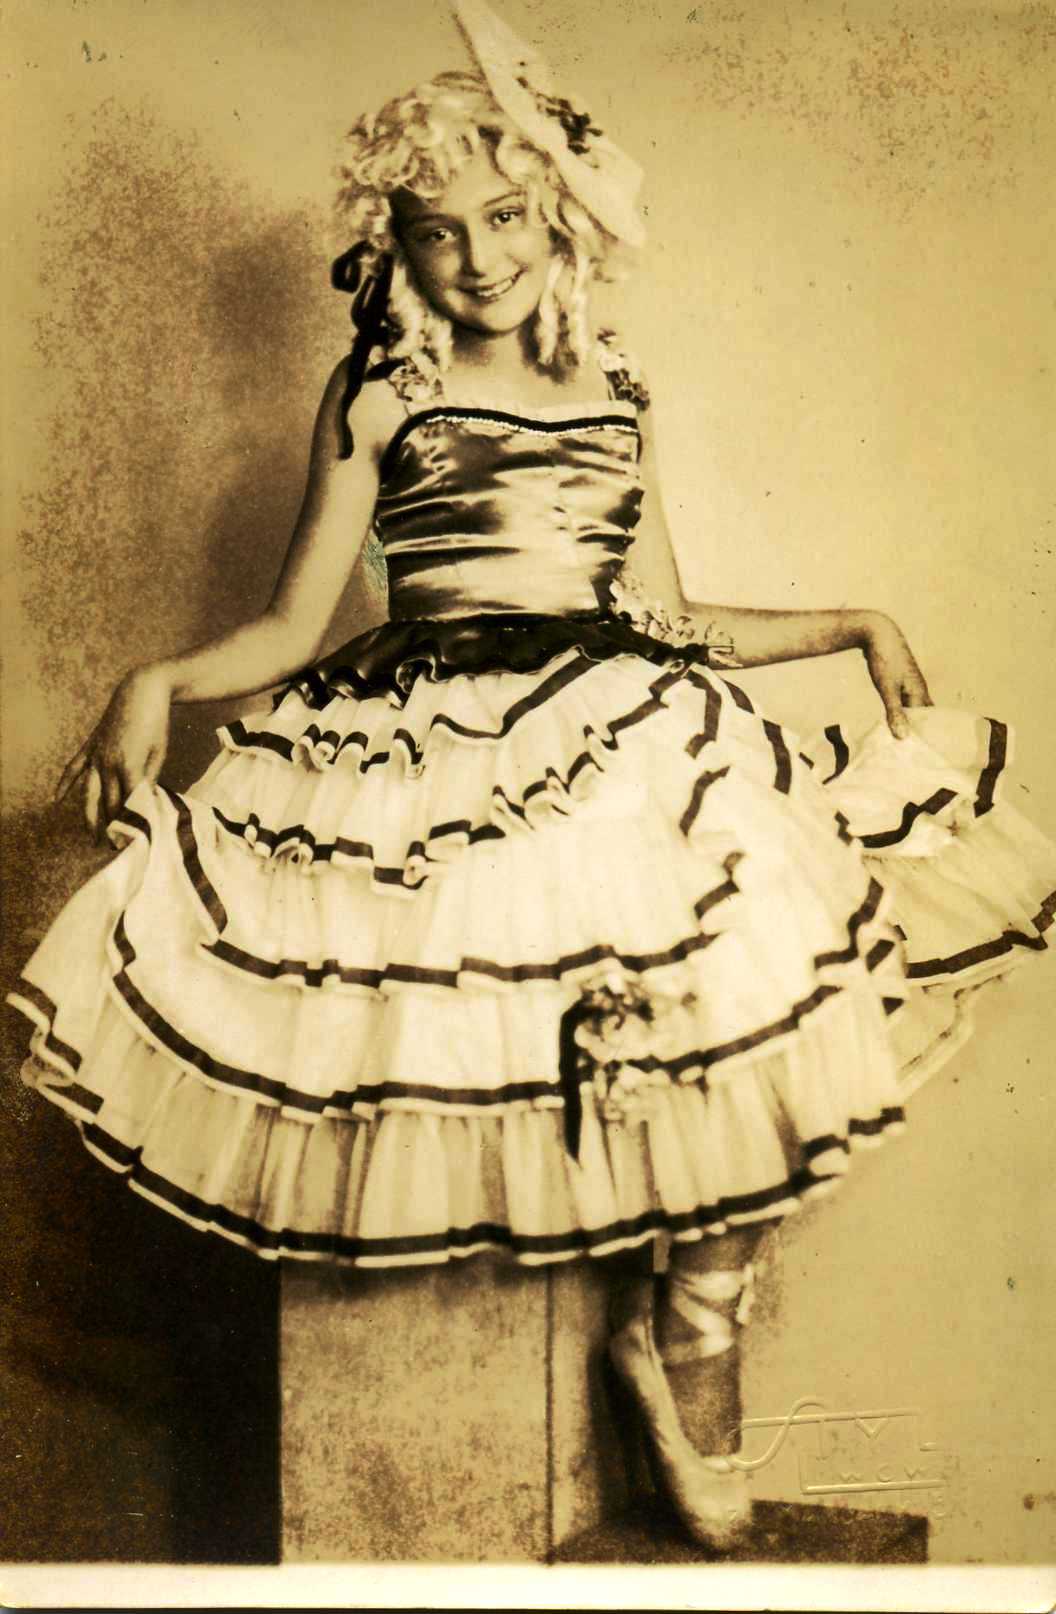 OUR SCREENPLAY BEAUTY STASIA ALEXINISKA. She was a very talented young ballerina in the 1930's (also Victor's first puppy love). Later, during the Cold War, Victor helped her escape from USSR using a pretense ballet engagement in Vienna.